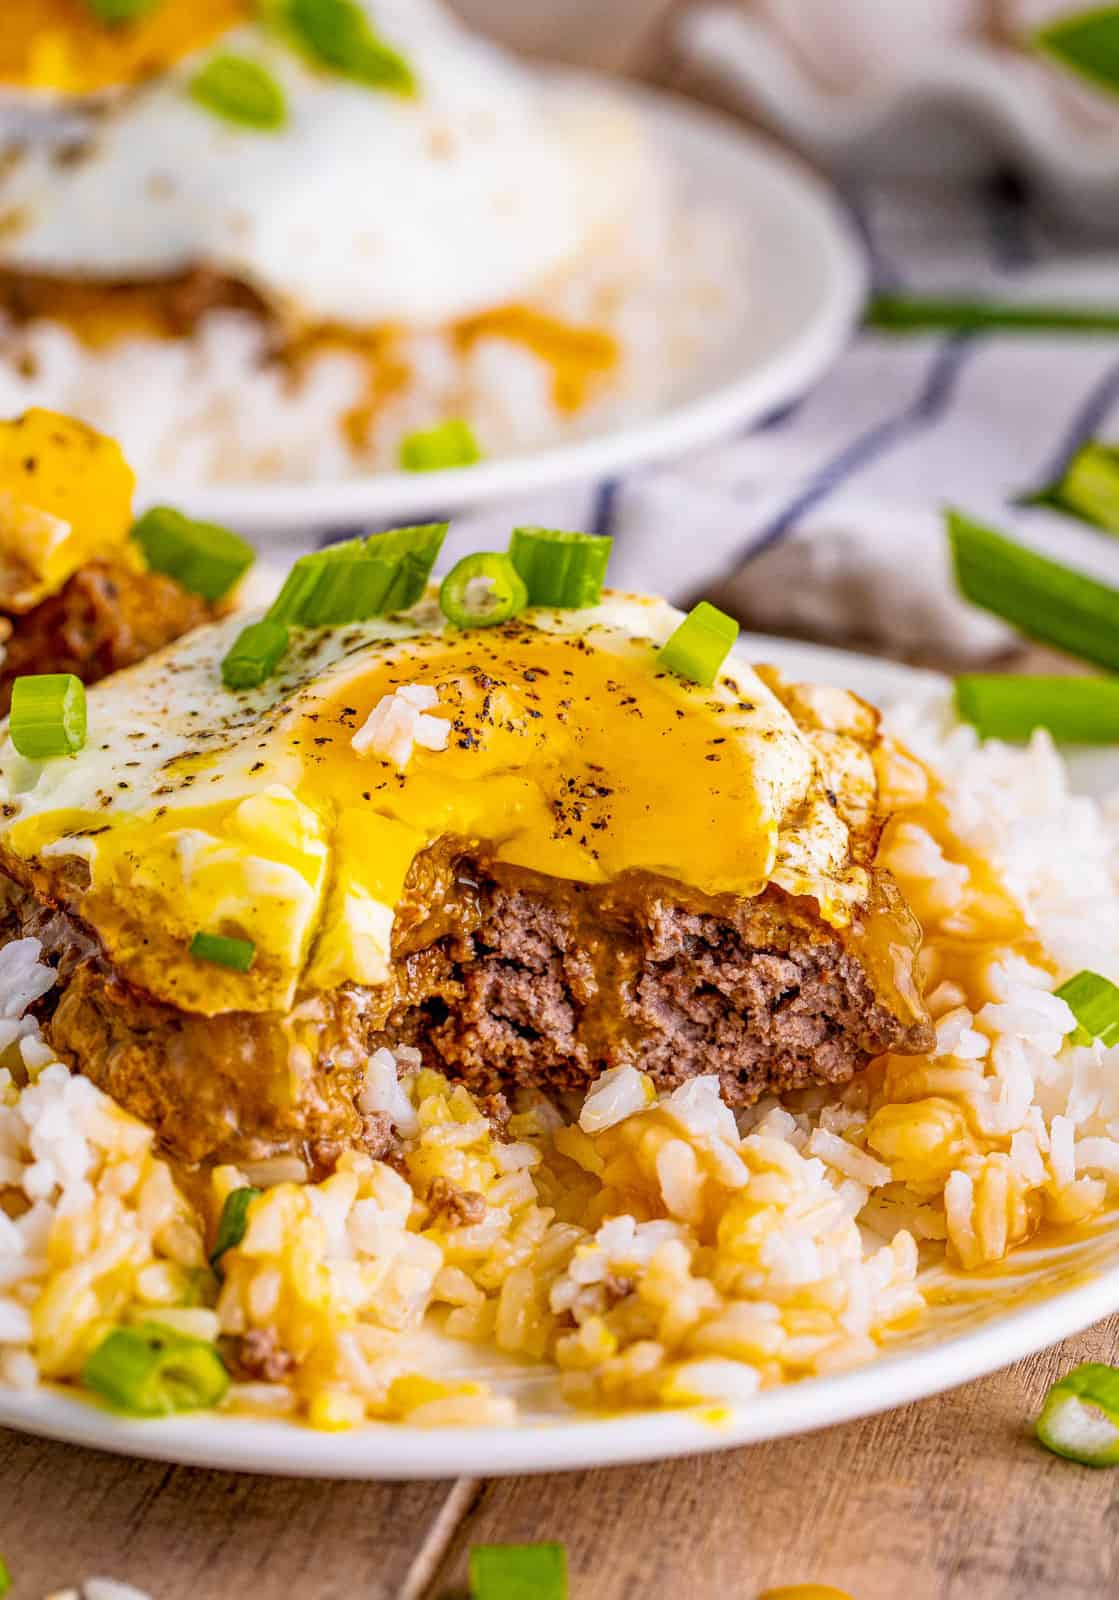 Bite taken out of Loco Moco Recipe showing inside with egg yolk running down.